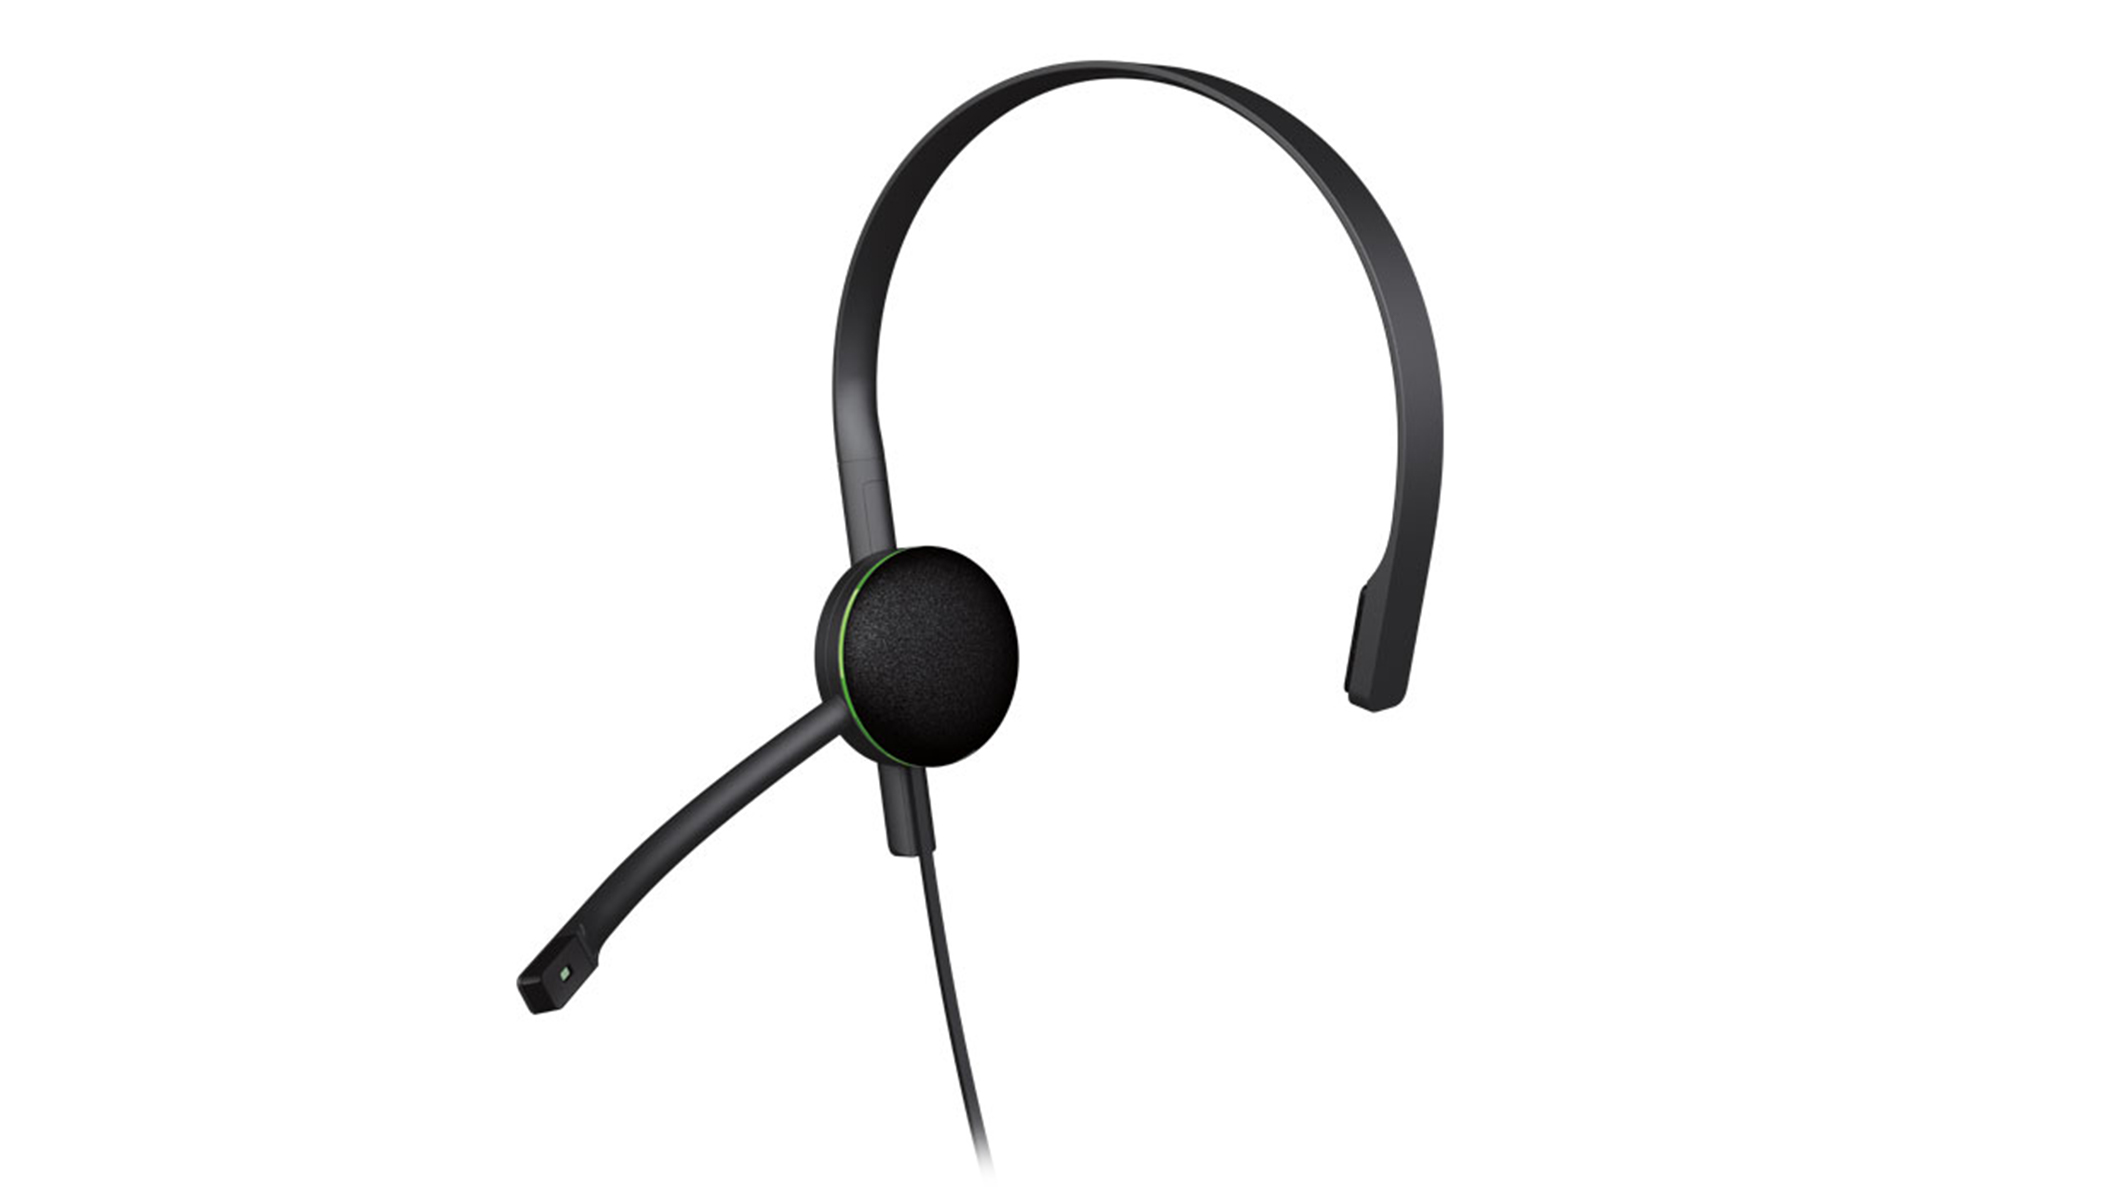 headset xbox one chat